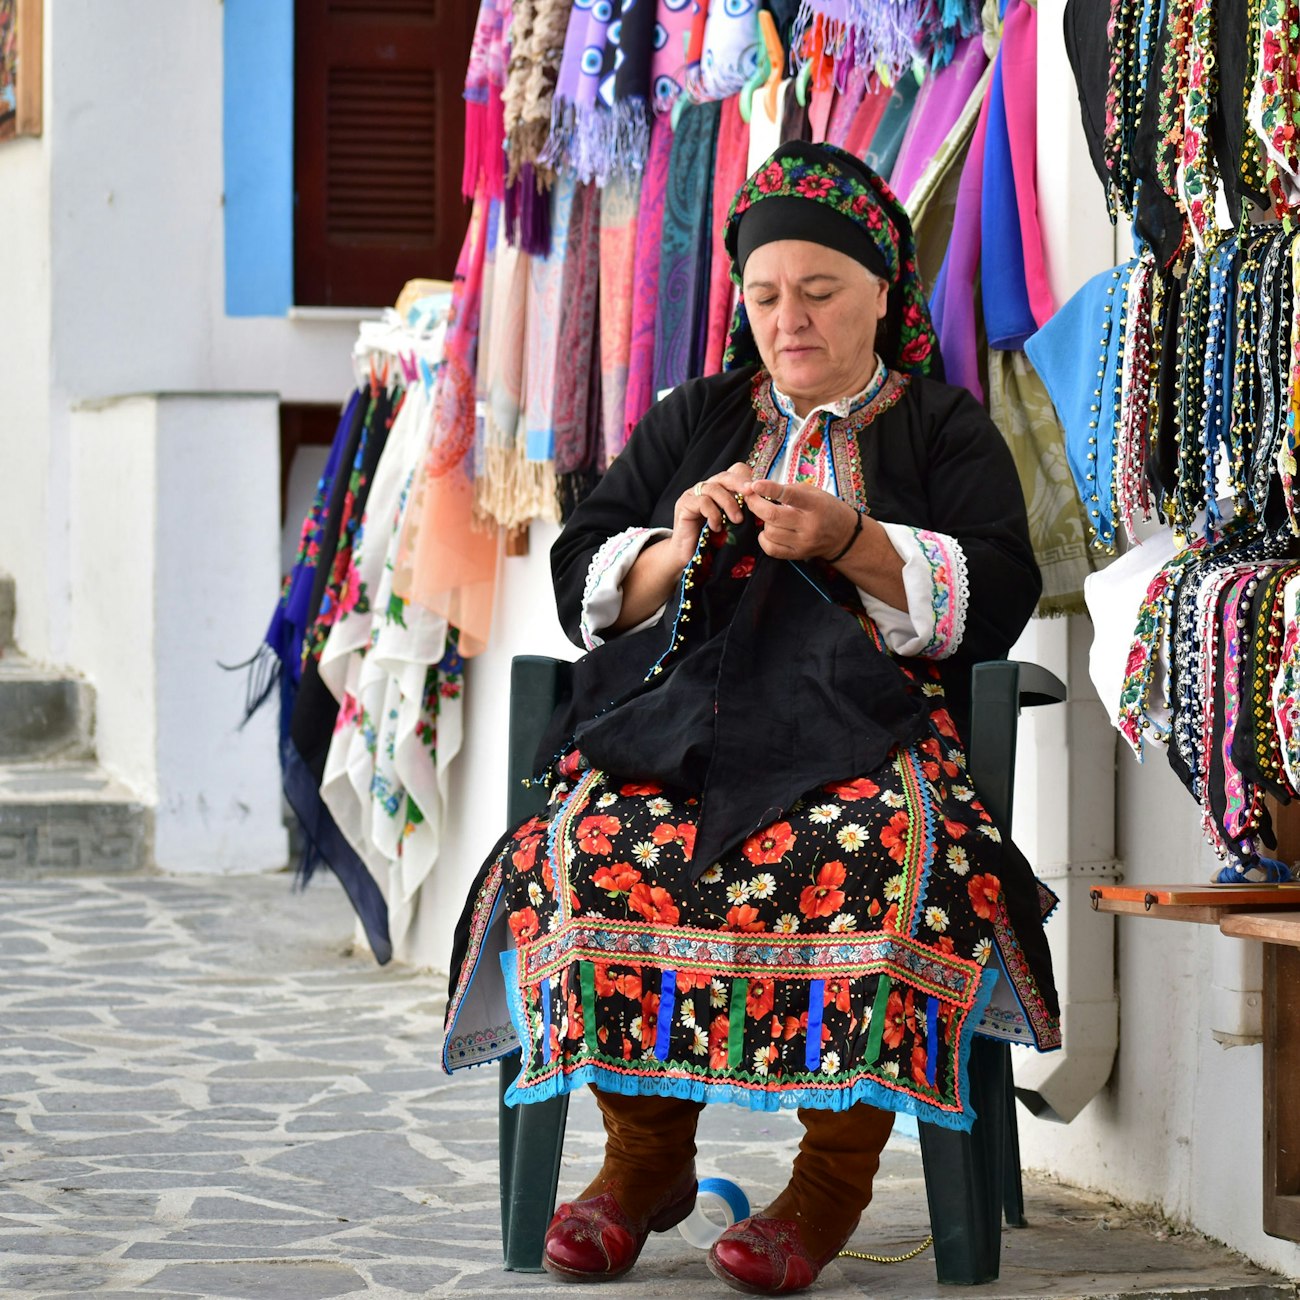 Woman in Greek costume (black headscarf, black cardigan trimmed with ribbon, colorful skirt) sits on a walkway and stitches an edging on a handkerchief.